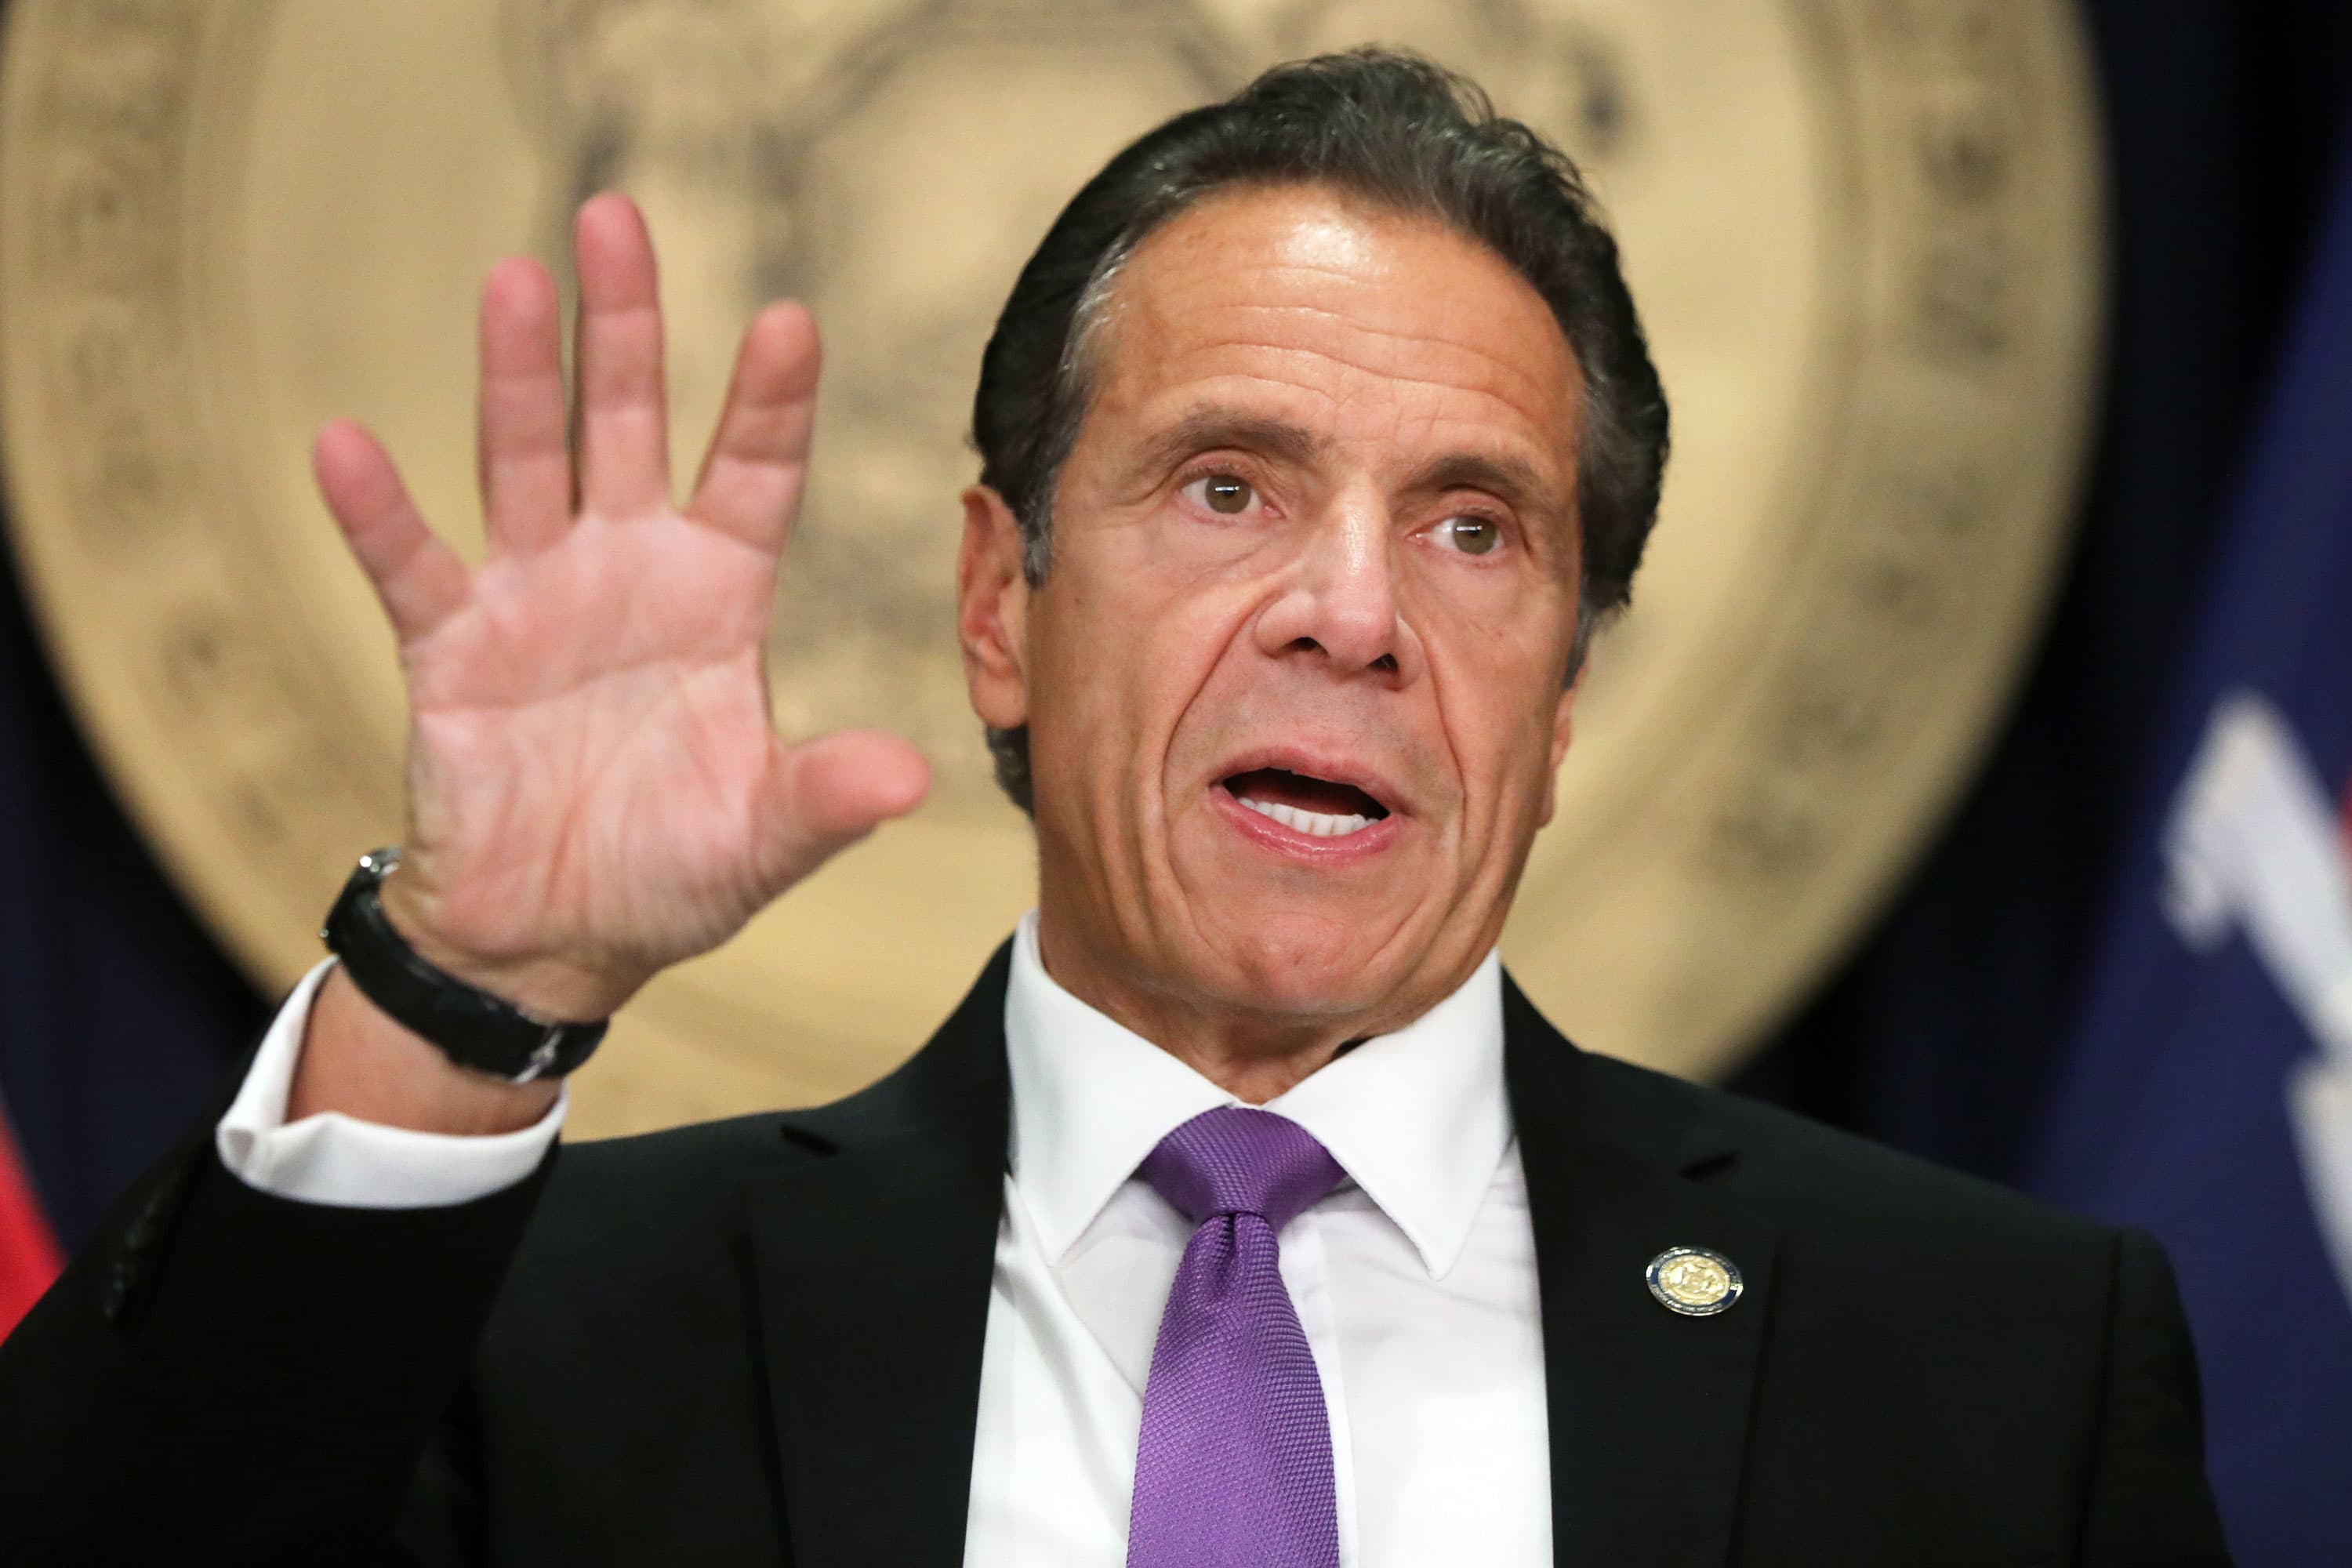 250 CEOs and executives express “alarm” over the biggest tax hike in New York history